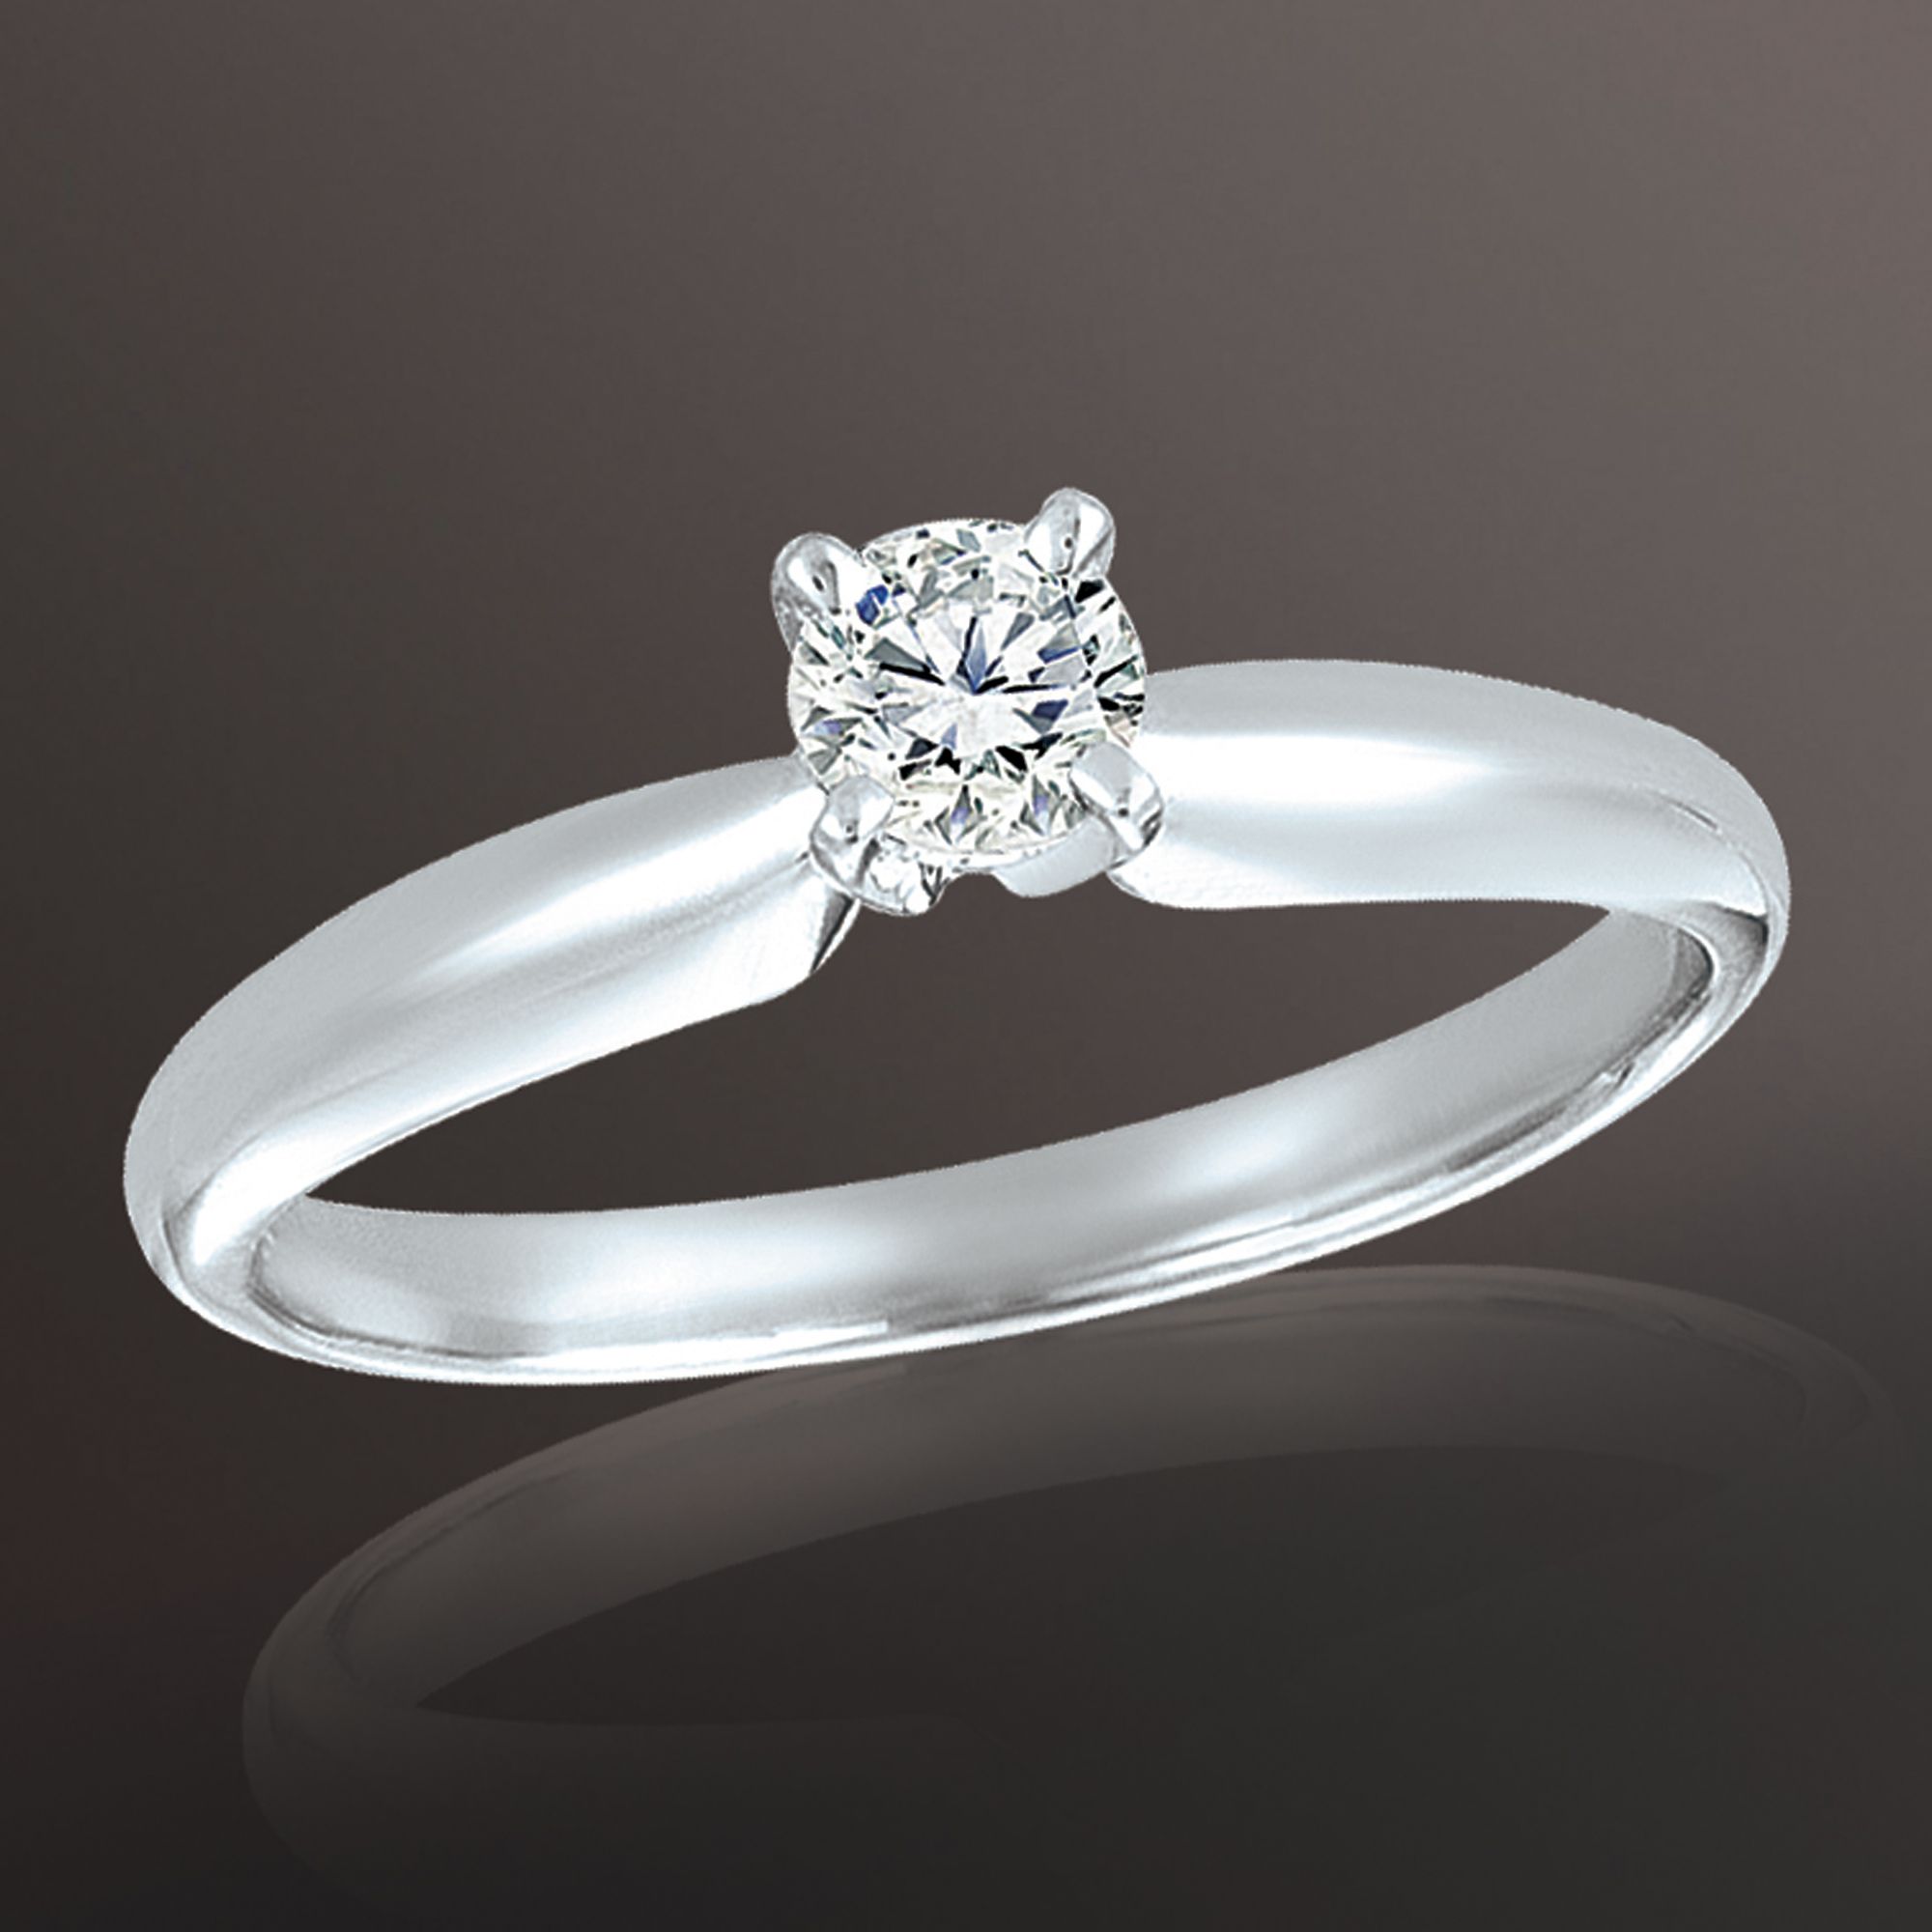 Everlasting Love 1/4 cttw Diamond Solitaire Ring in 10k White Gold_in Size 7